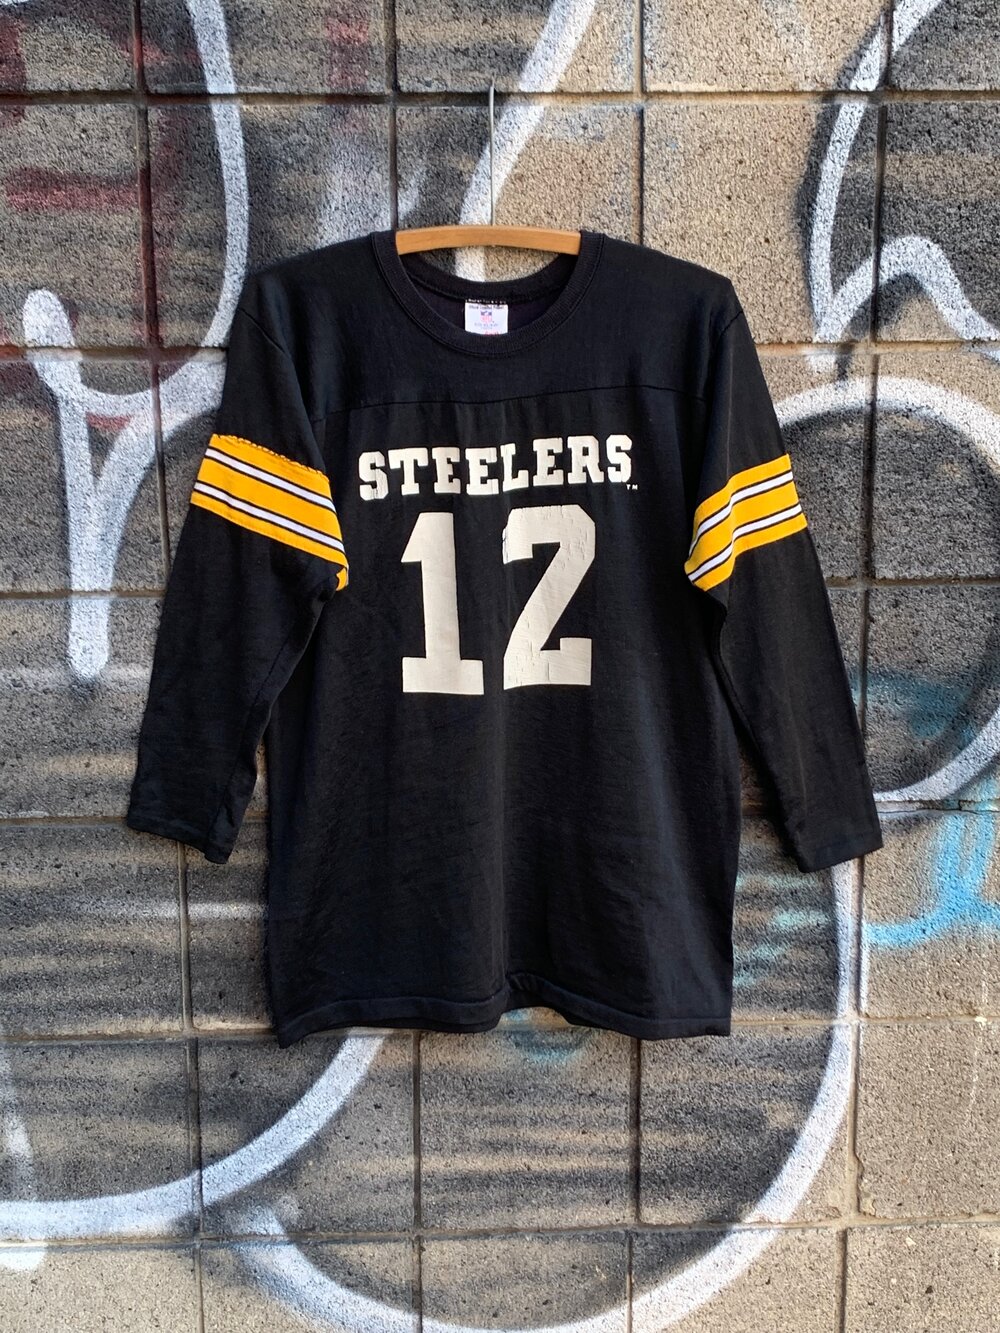 1970s Rawlings Steelers Terry Bradshaw Jersey Youth Size XL (Adult